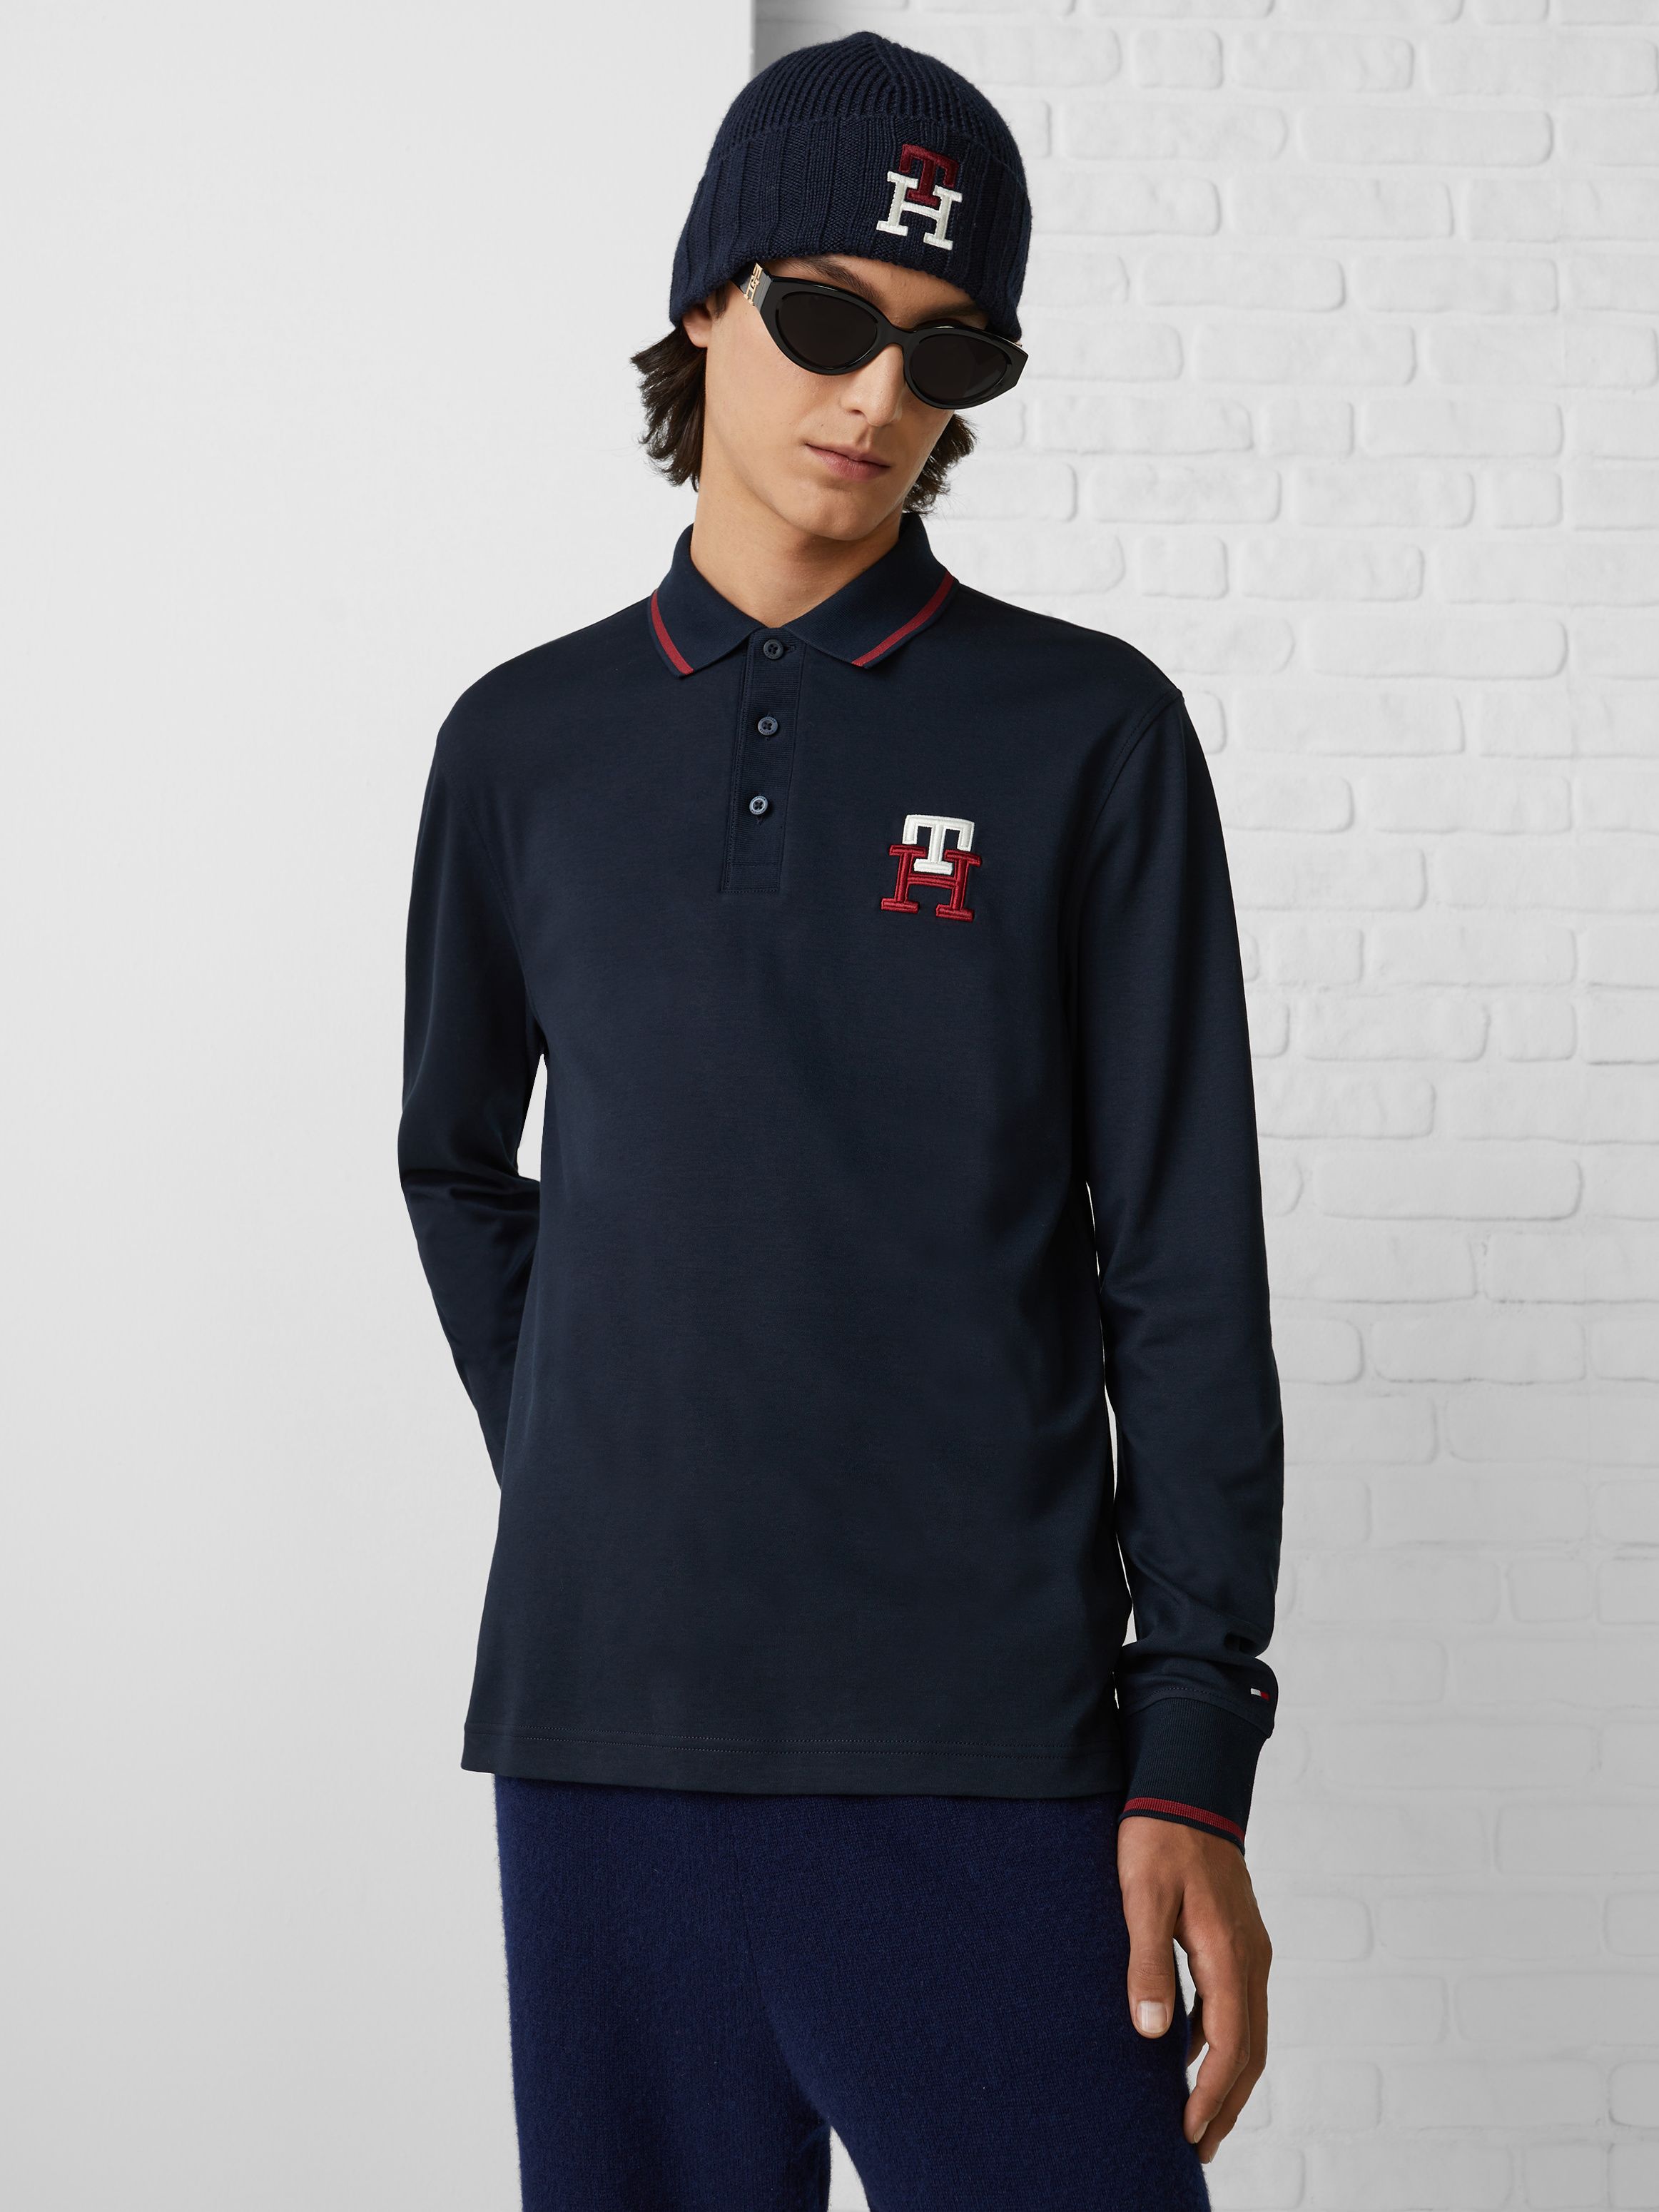 THE MONOGRAM COLLECTION Slim Fit Long-Sleeve Polo | Tommy Hilfiger